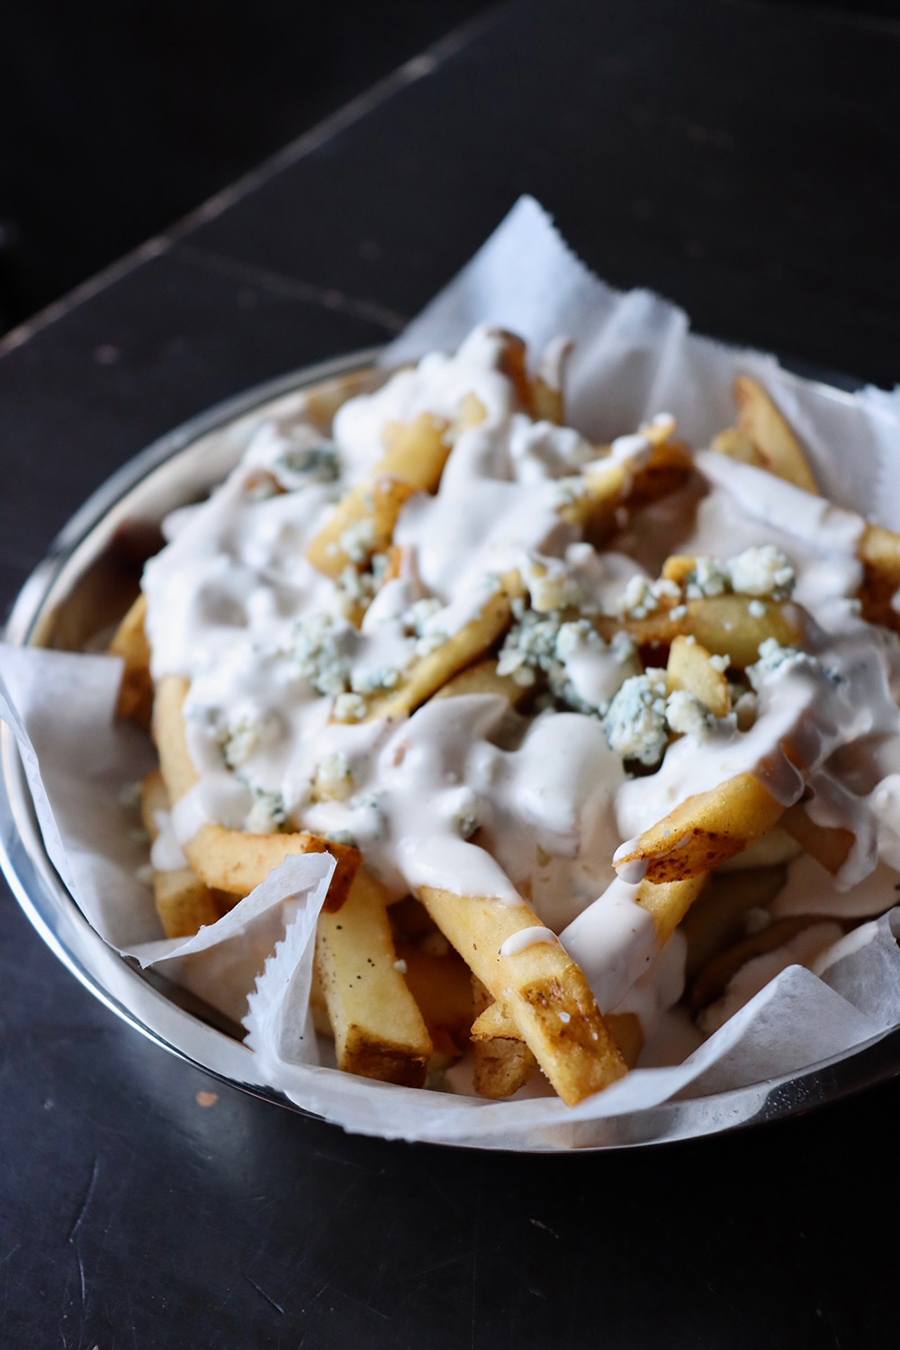 Fries are smothered in a creamy white sauce with chunks of blue cheese visible on top.